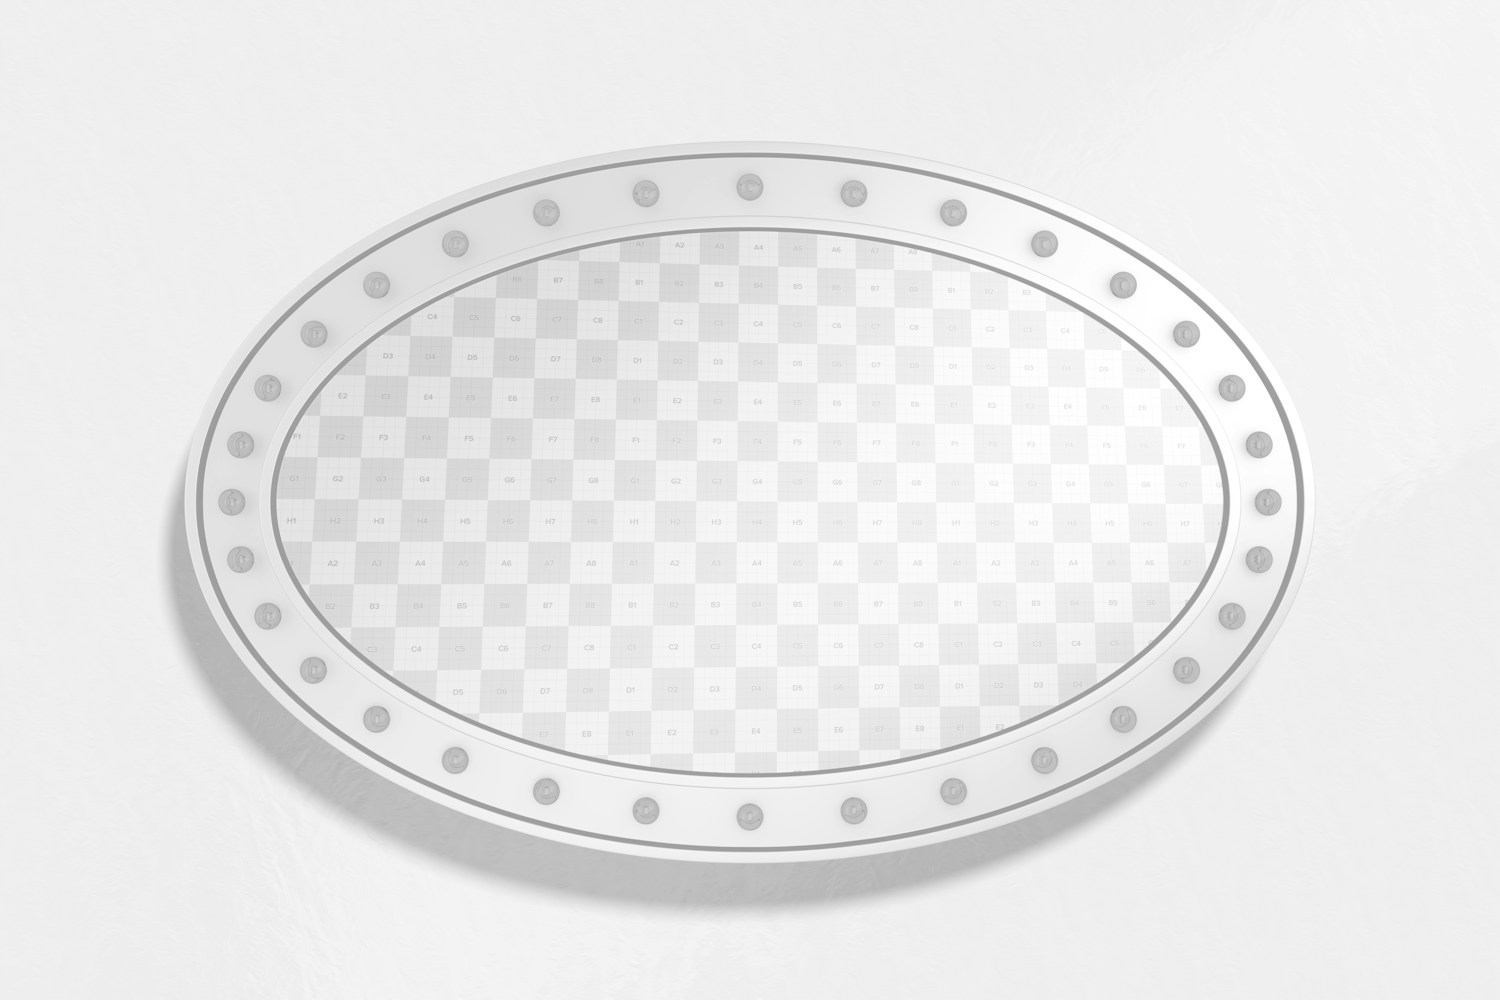 Luminous Oval Promotional Sign Mockup, Top View